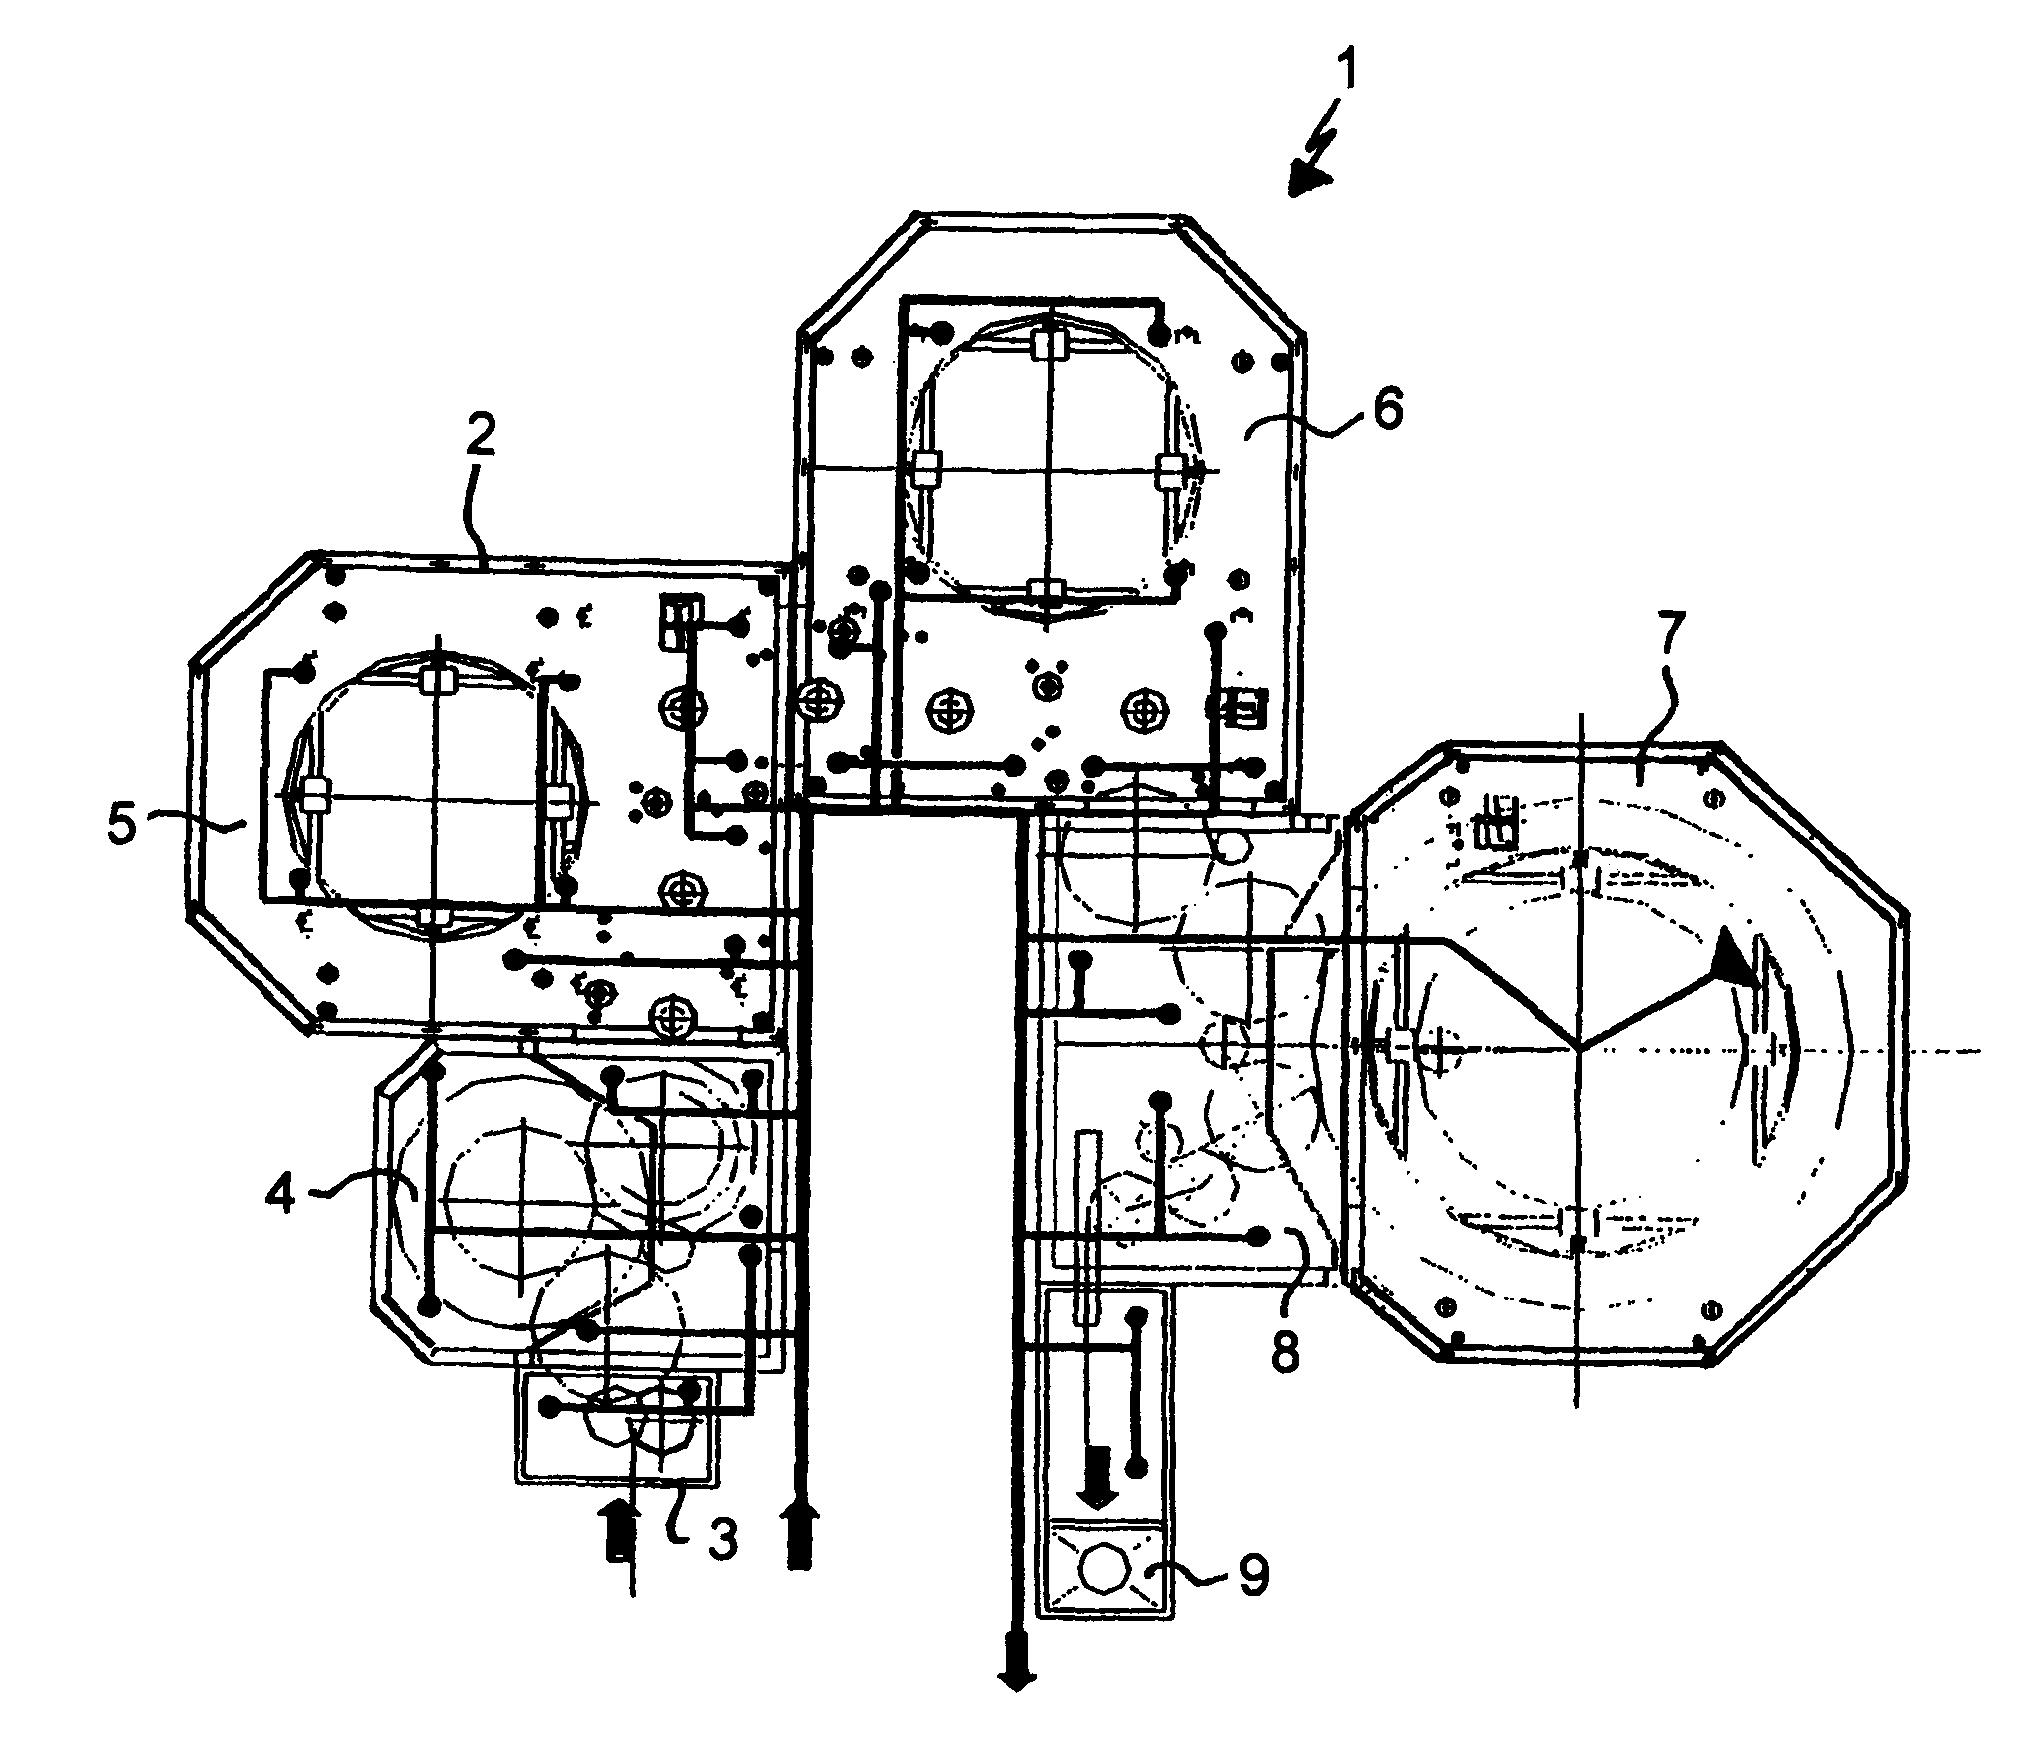 Aseptic beverage bottle filling plant with a clean room arrangement enclosing the aseptic beverage bottle filling plant and a method of operating same, and an aseptic container filling plant with a clean room arrangement enclosing the aseptic container filling plant, and a method of operating same